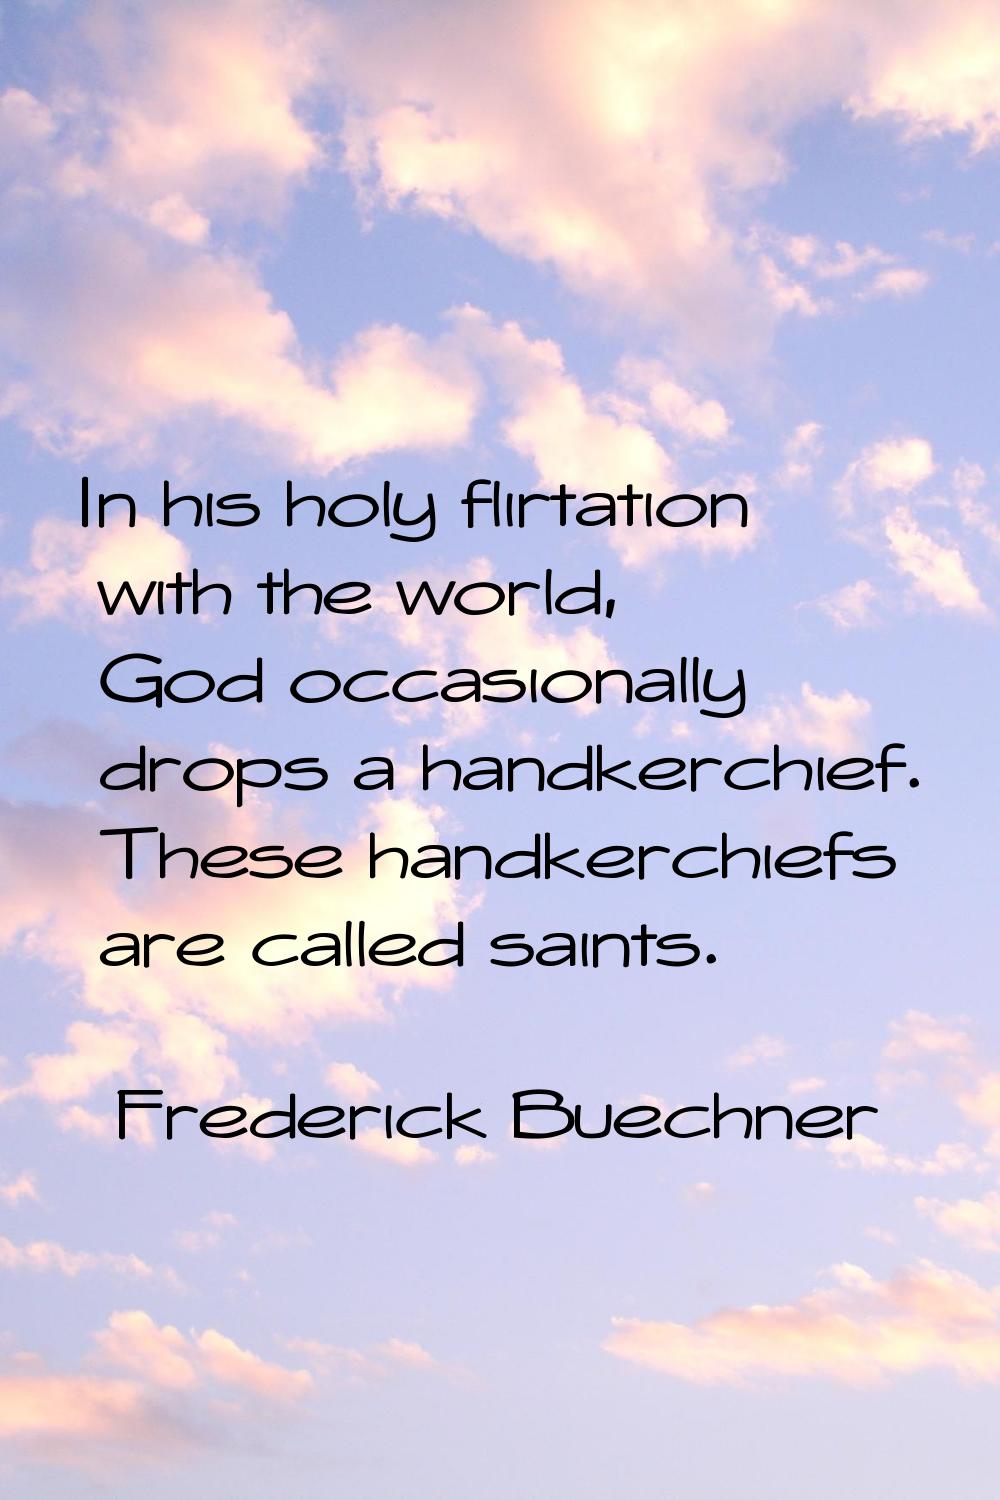 In his holy flirtation with the world, God occasionally drops a handkerchief. These handkerchiefs a